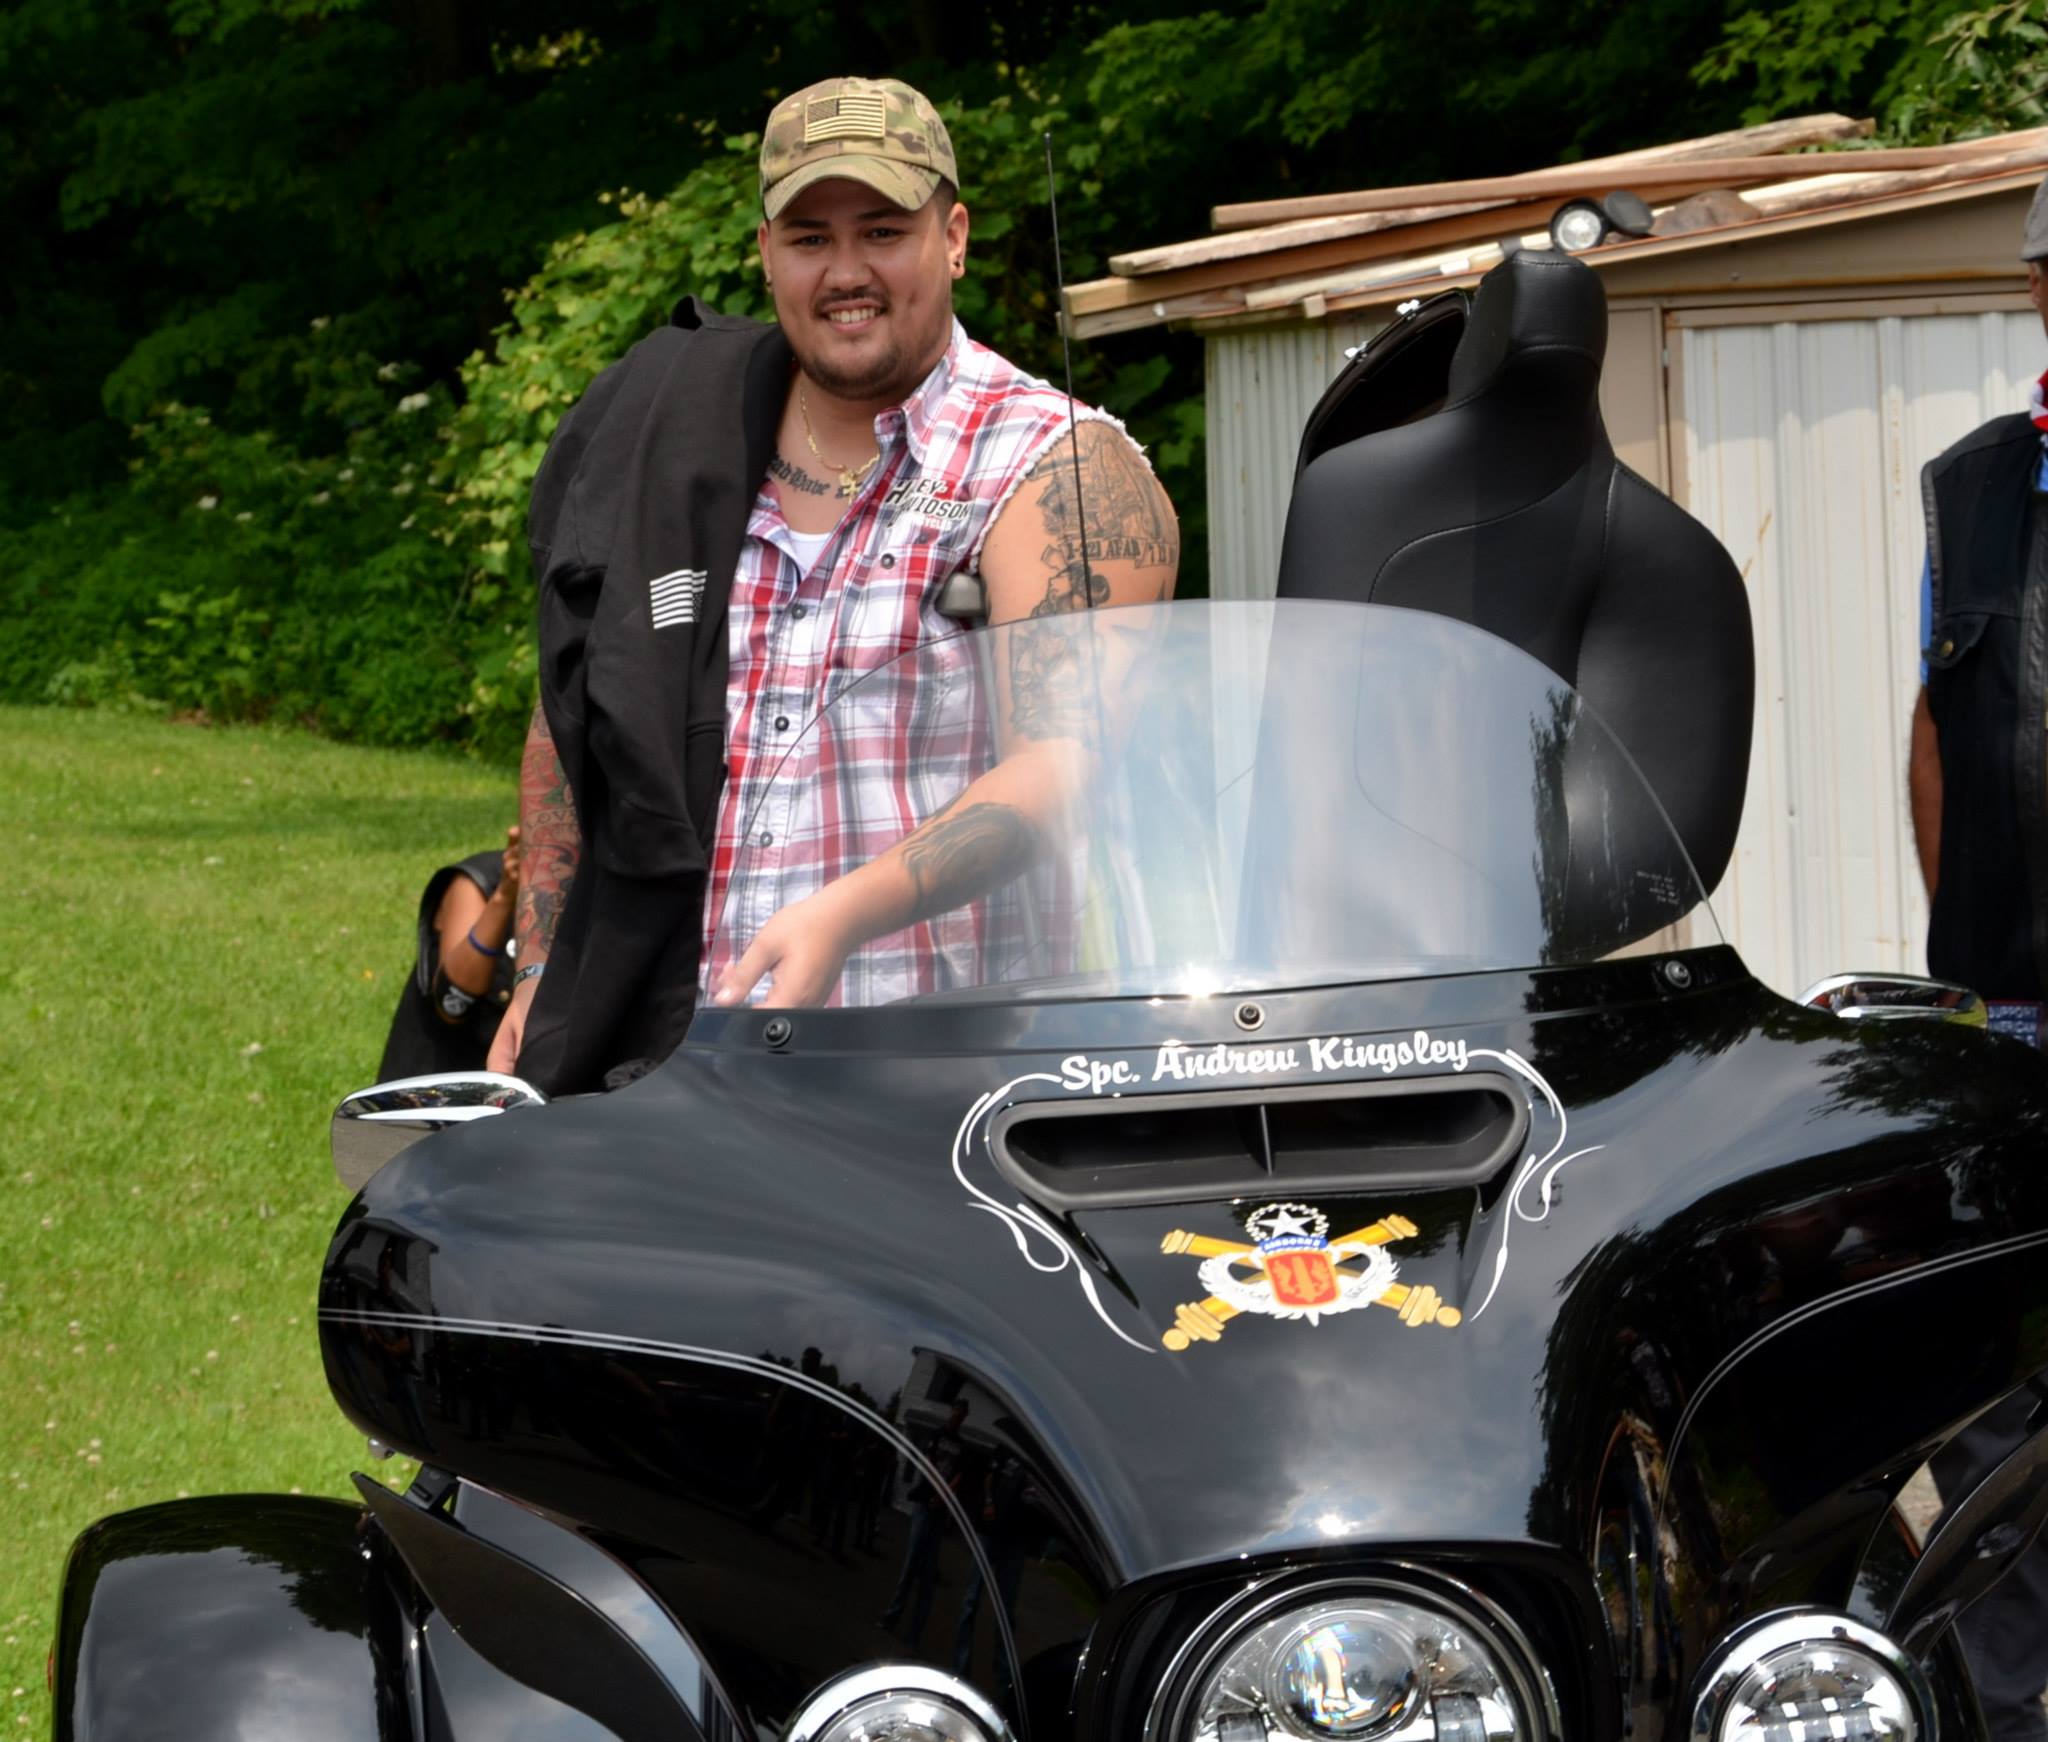 Boston Wounded Vet MC Ride presents Andy Kingsley his New 2014 Modified Trike11